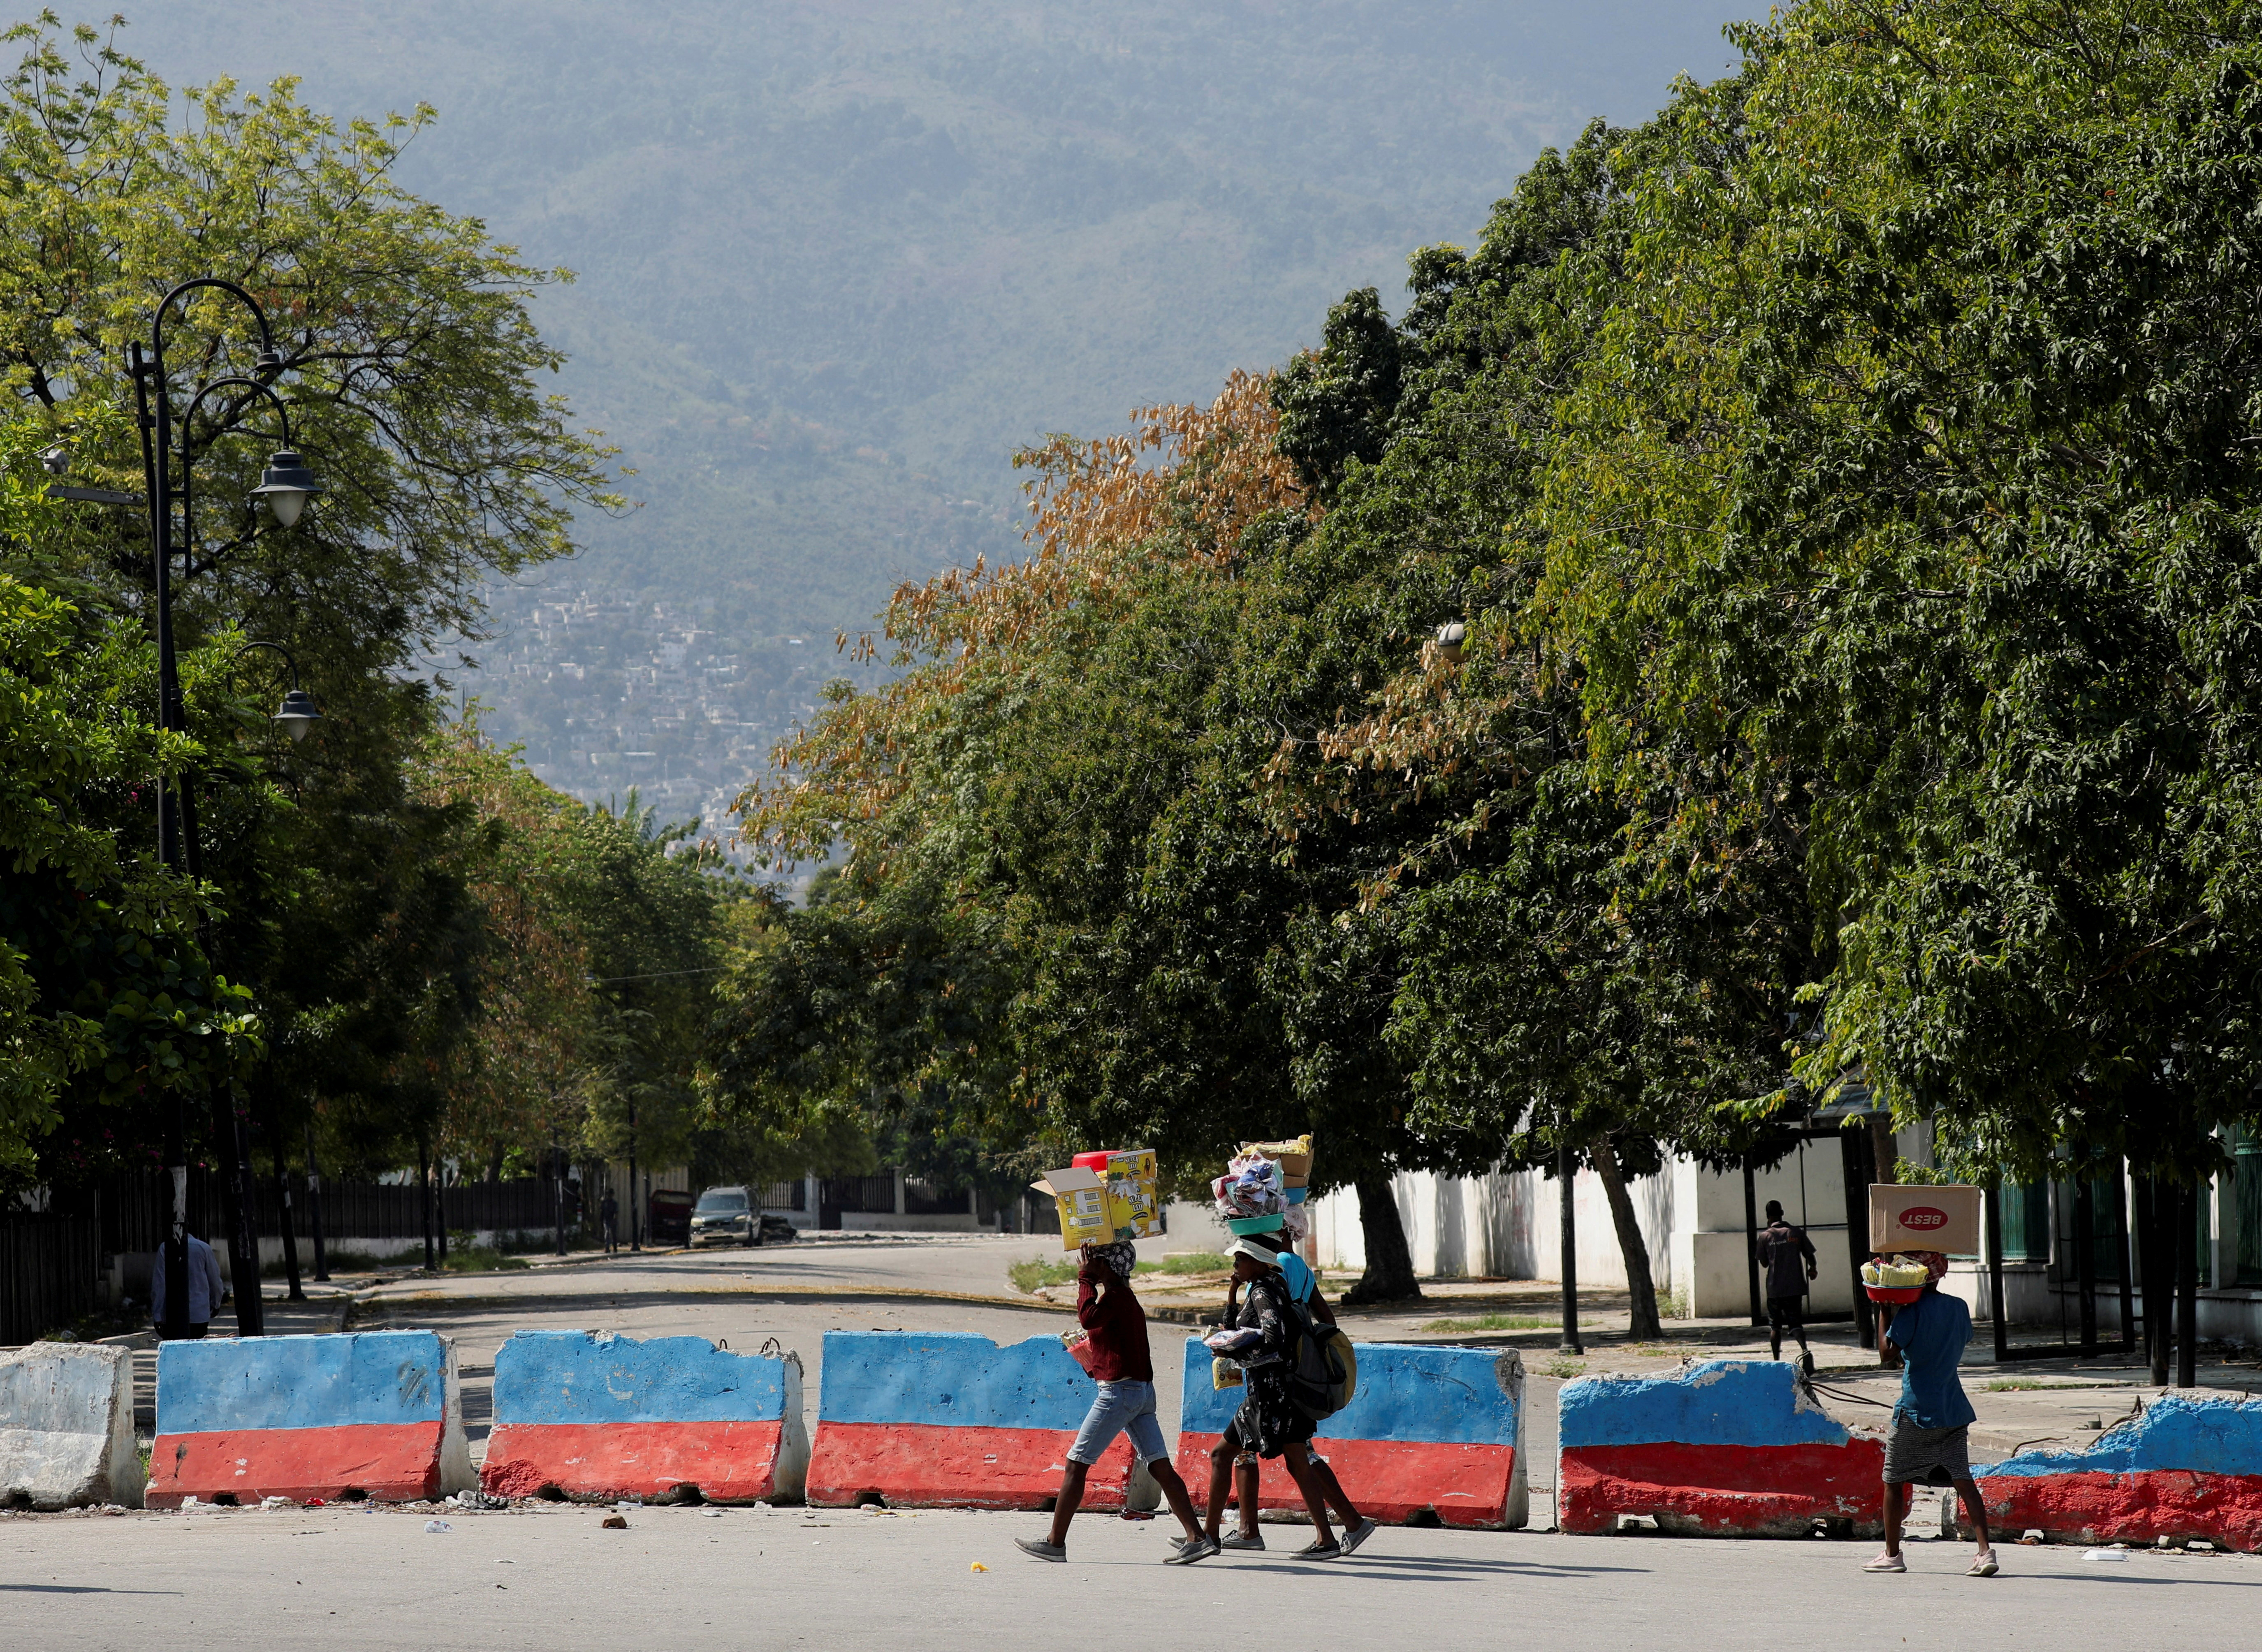 After prime minister pledges to step down, uneasy quiet in Haiti capital